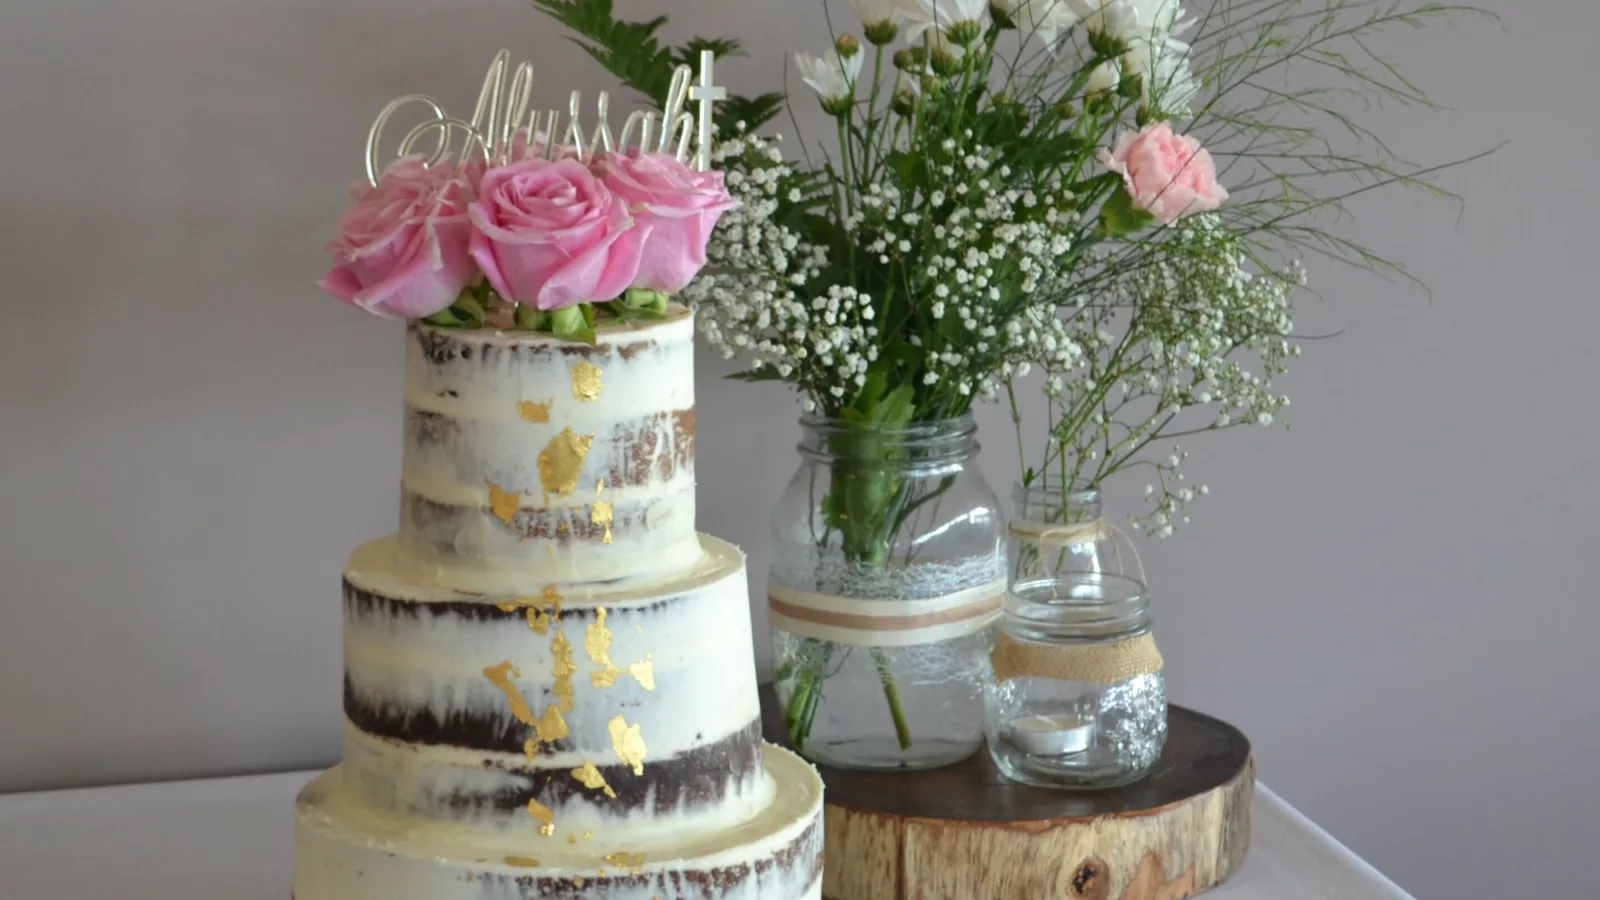 Three tier wedding cake with flowers in the background